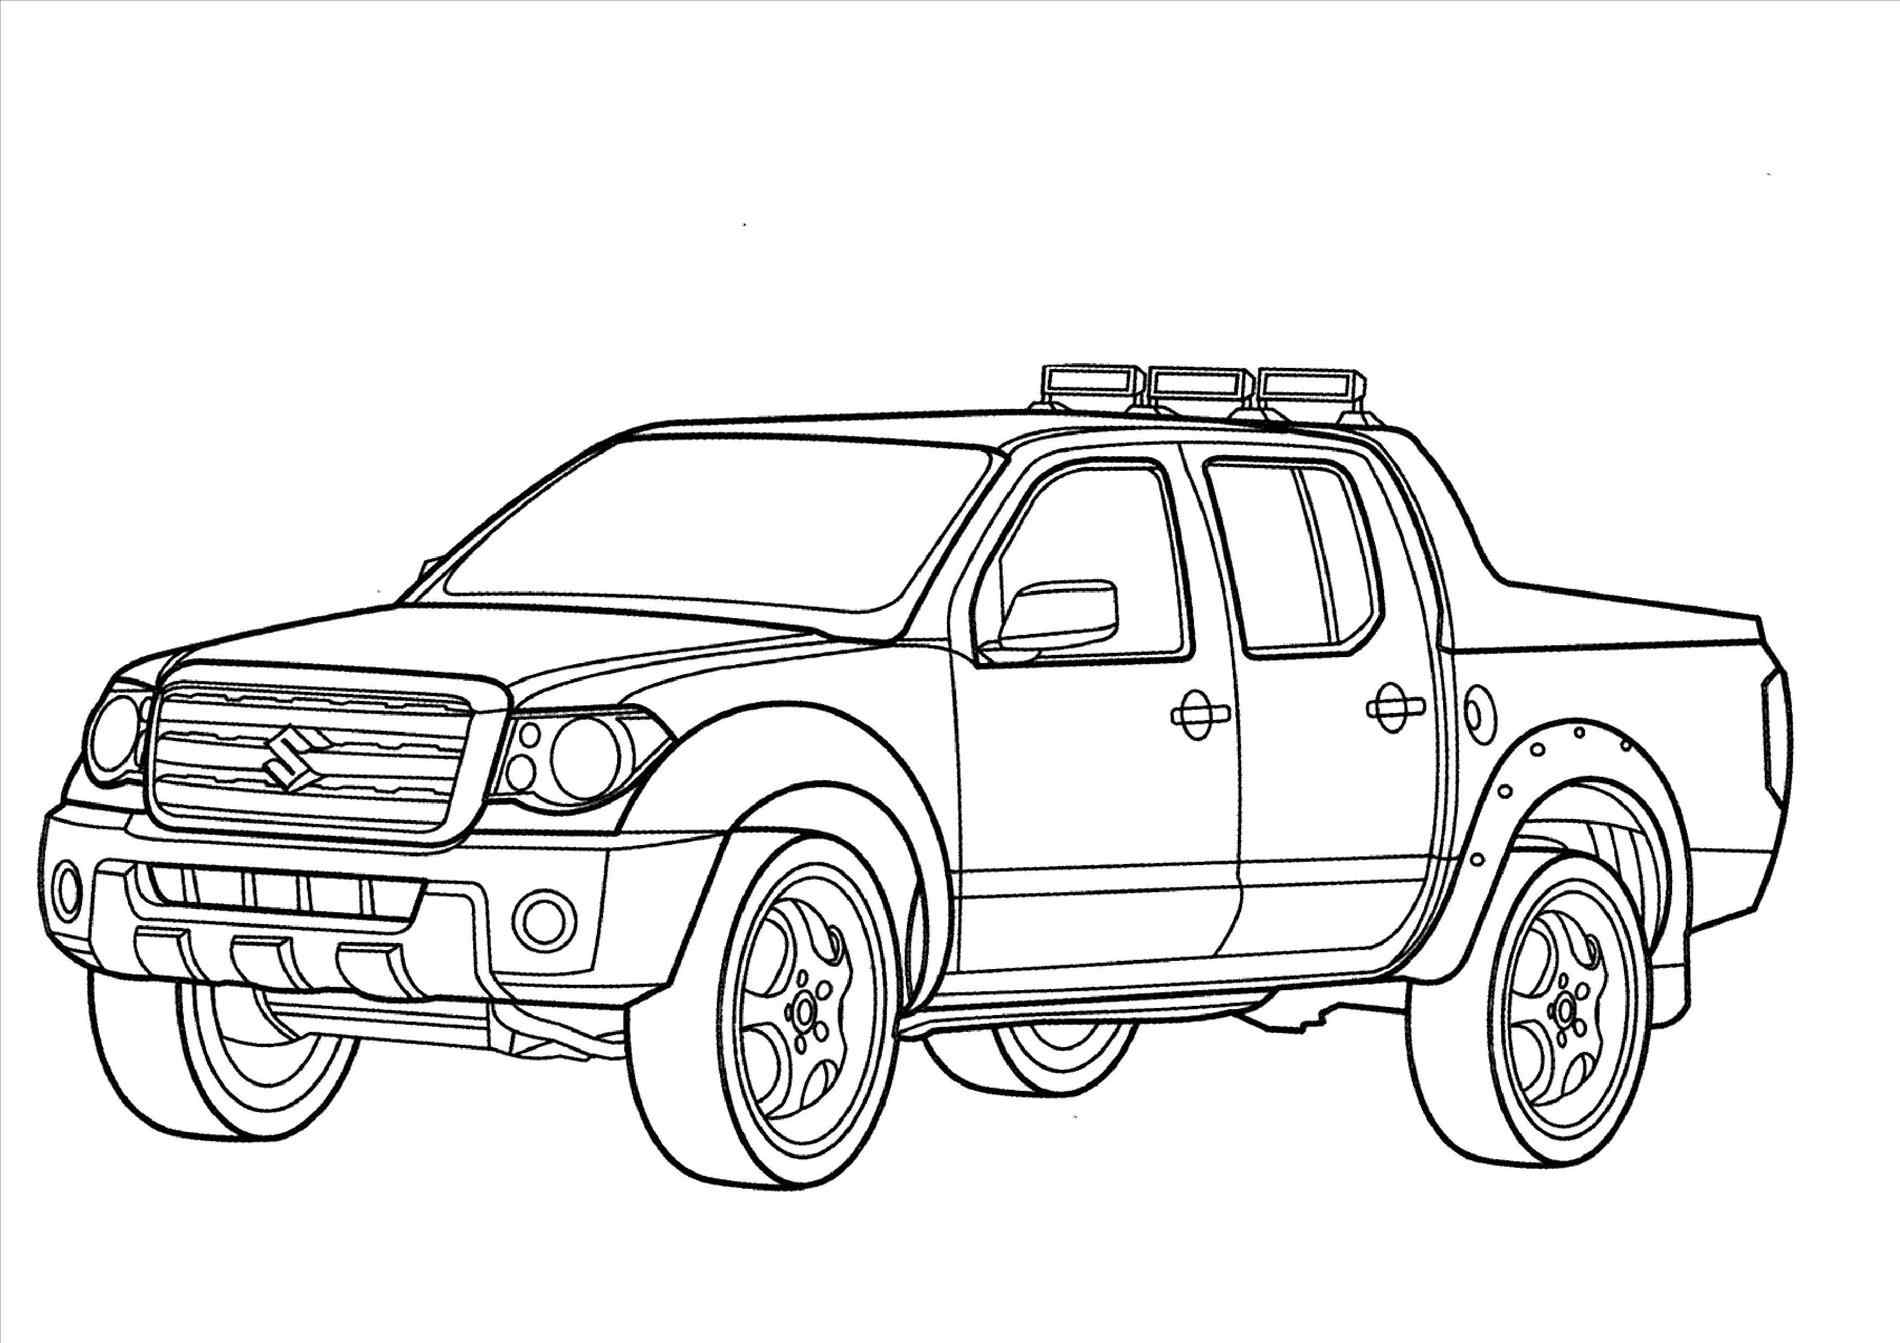 Dodge Ram Coloring Pages at GetColorings.com | Free ...